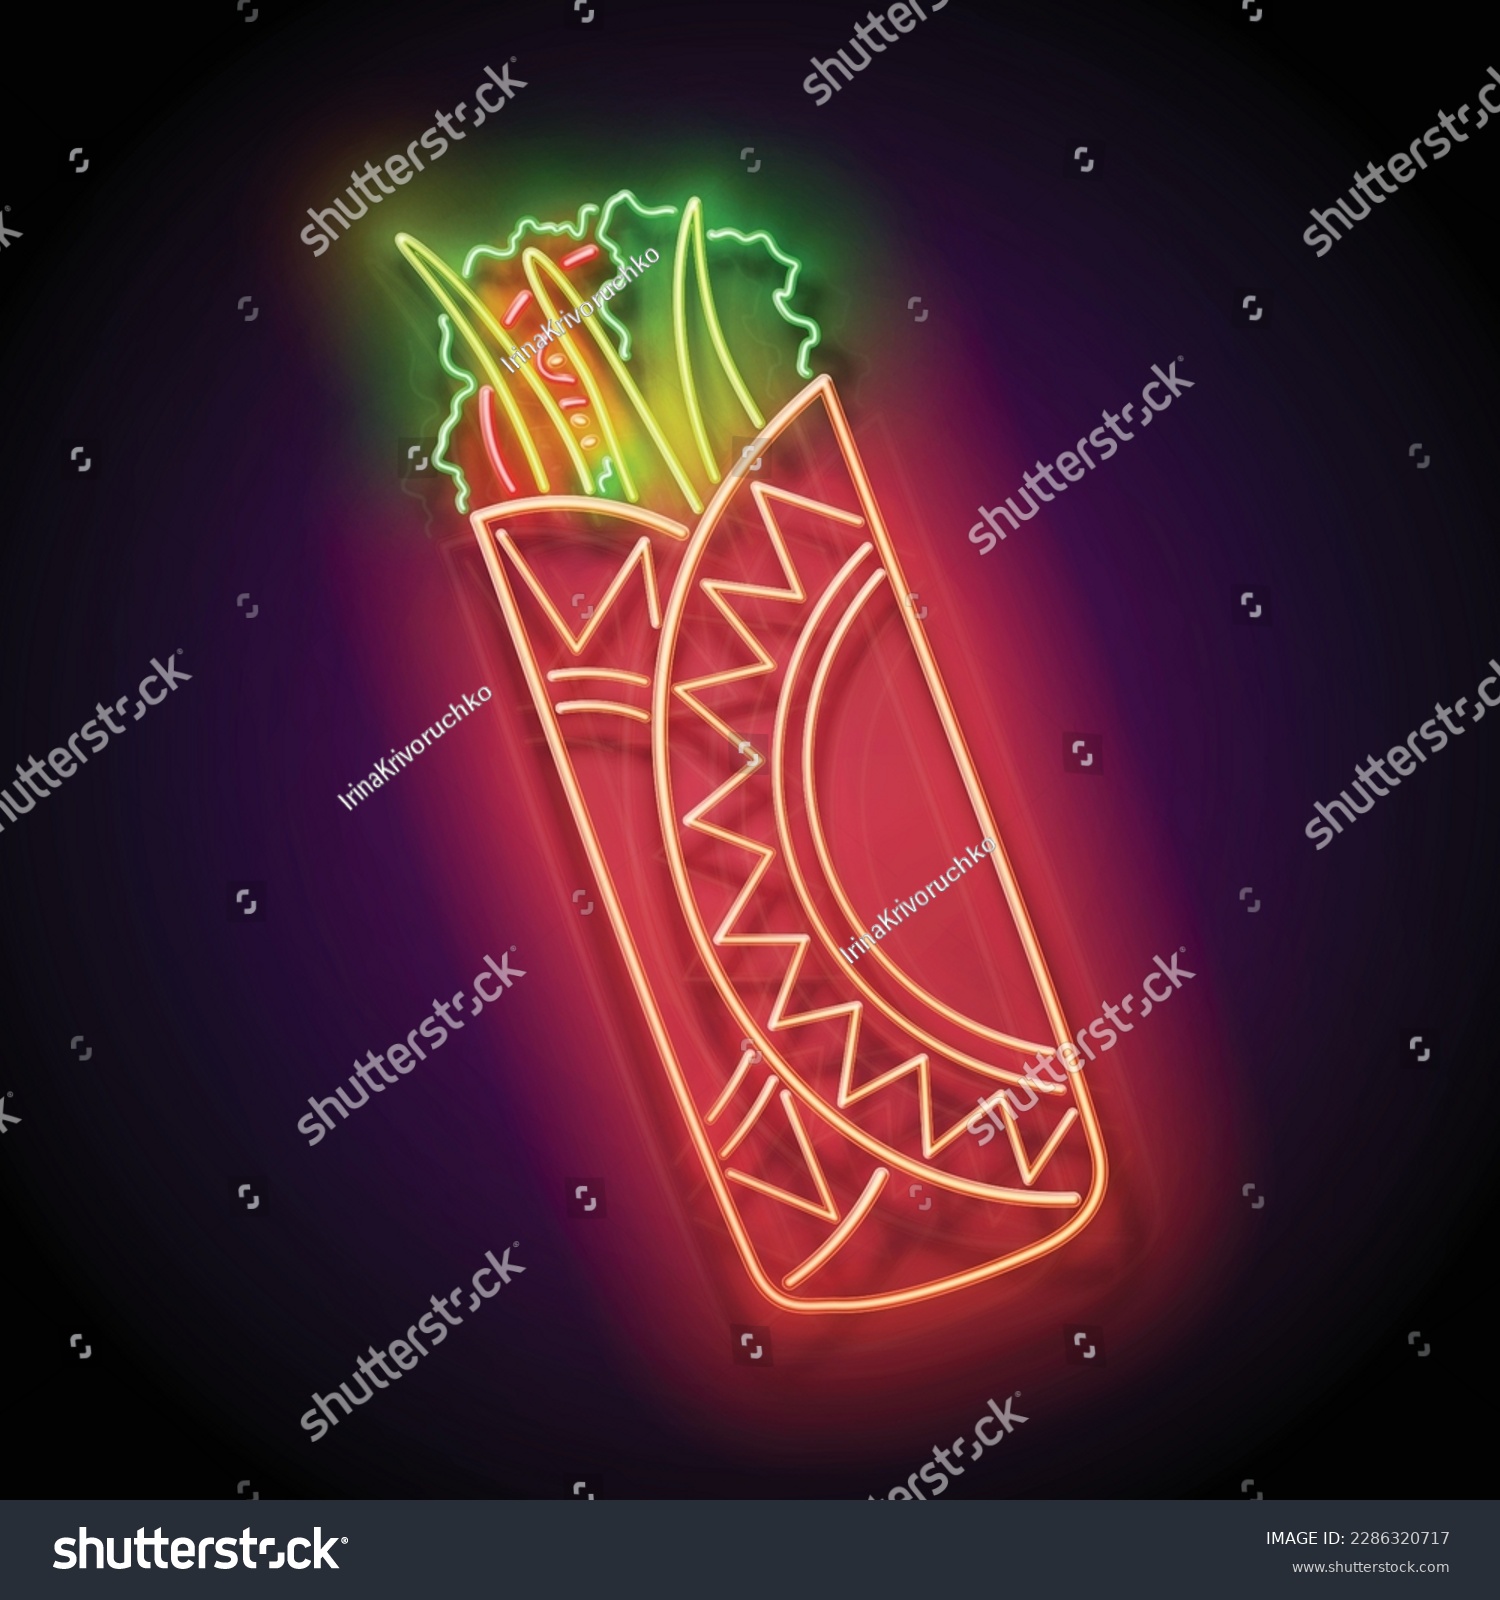 SVG of Glow Mexican chimichanga. Traditional ethnic food, appetizer. Neon Light Poster, Flyer, Banner, Signboard. Glossy Background. Vector 3d Illustration  svg